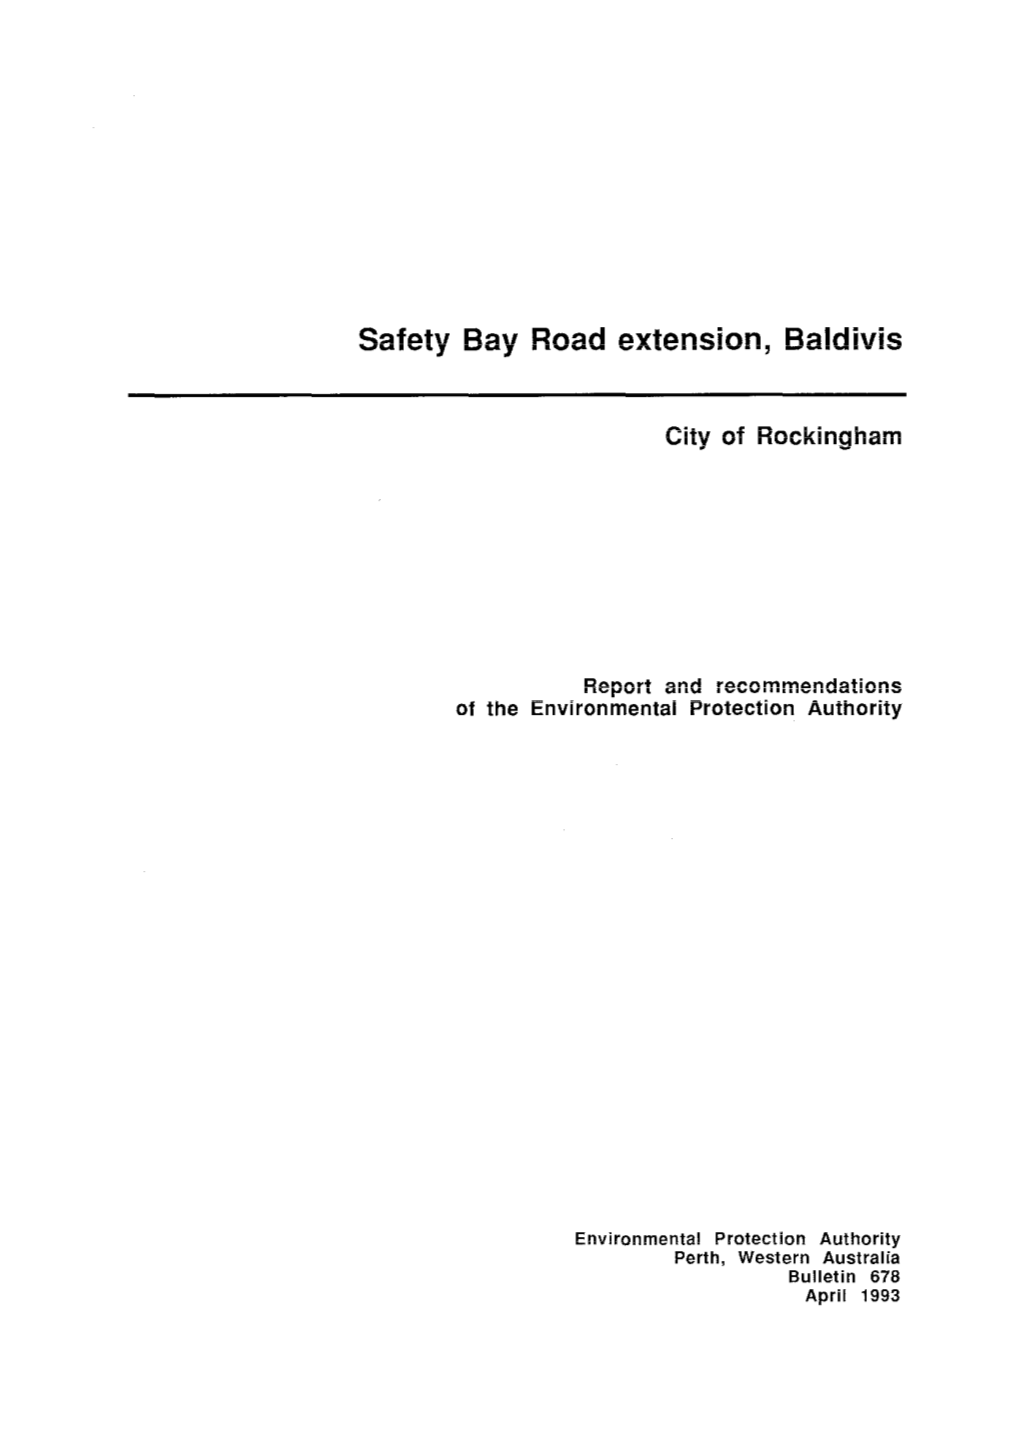 Safety Bay Road Extension, Baldivis